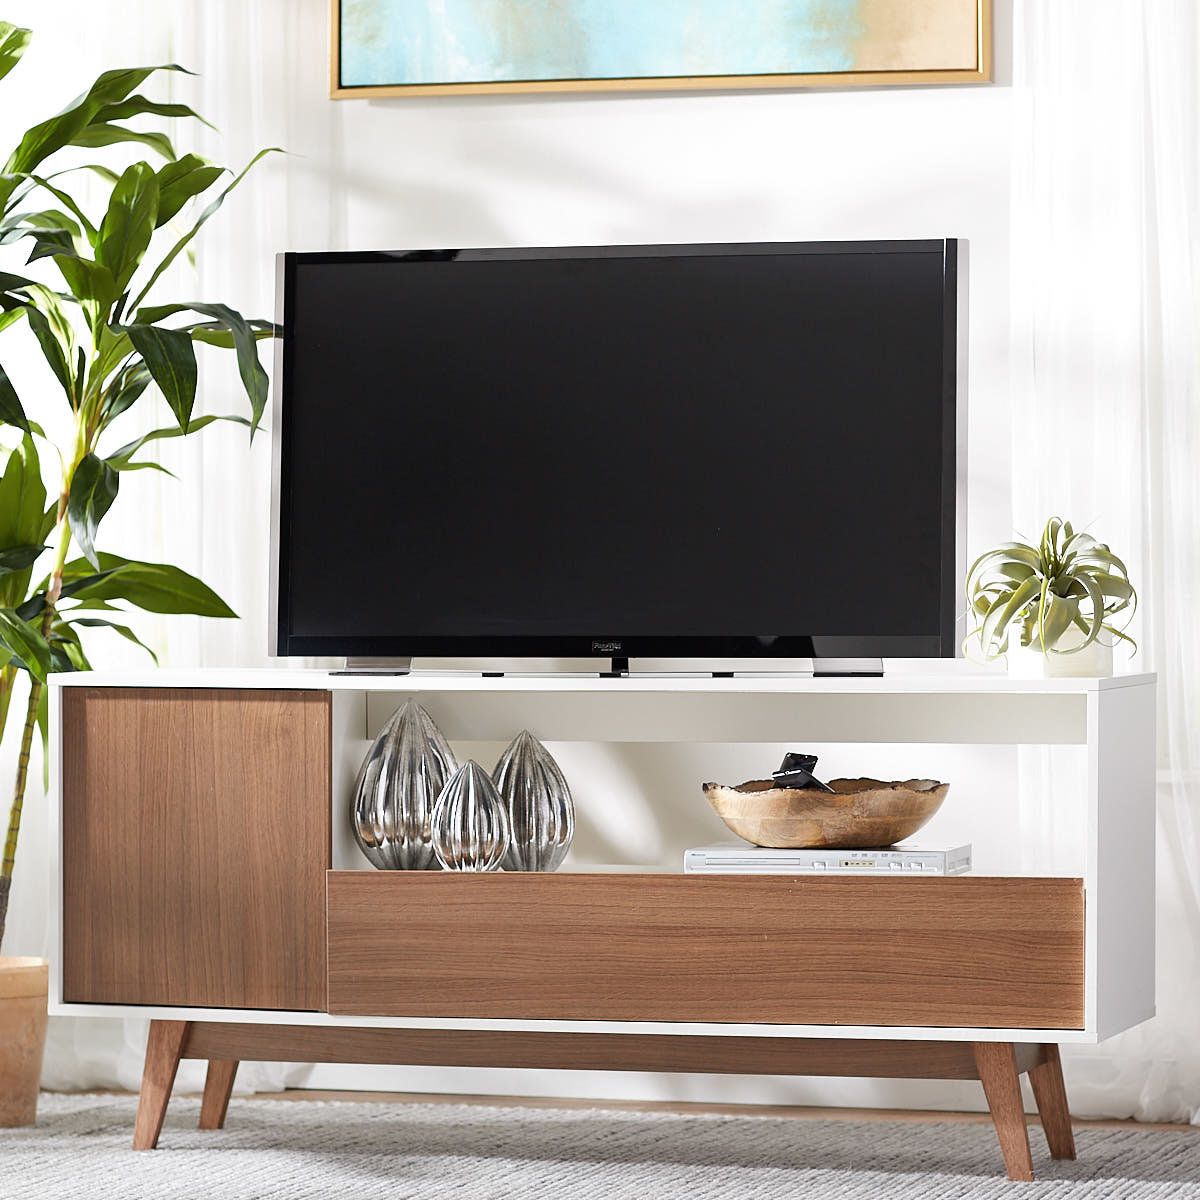 Langley Street Quincy Tv Stand For Tvs Up To 65" & Reviews | Wayfair Pertaining To Draper 62 Inch Tv Stands (View 11 of 30)